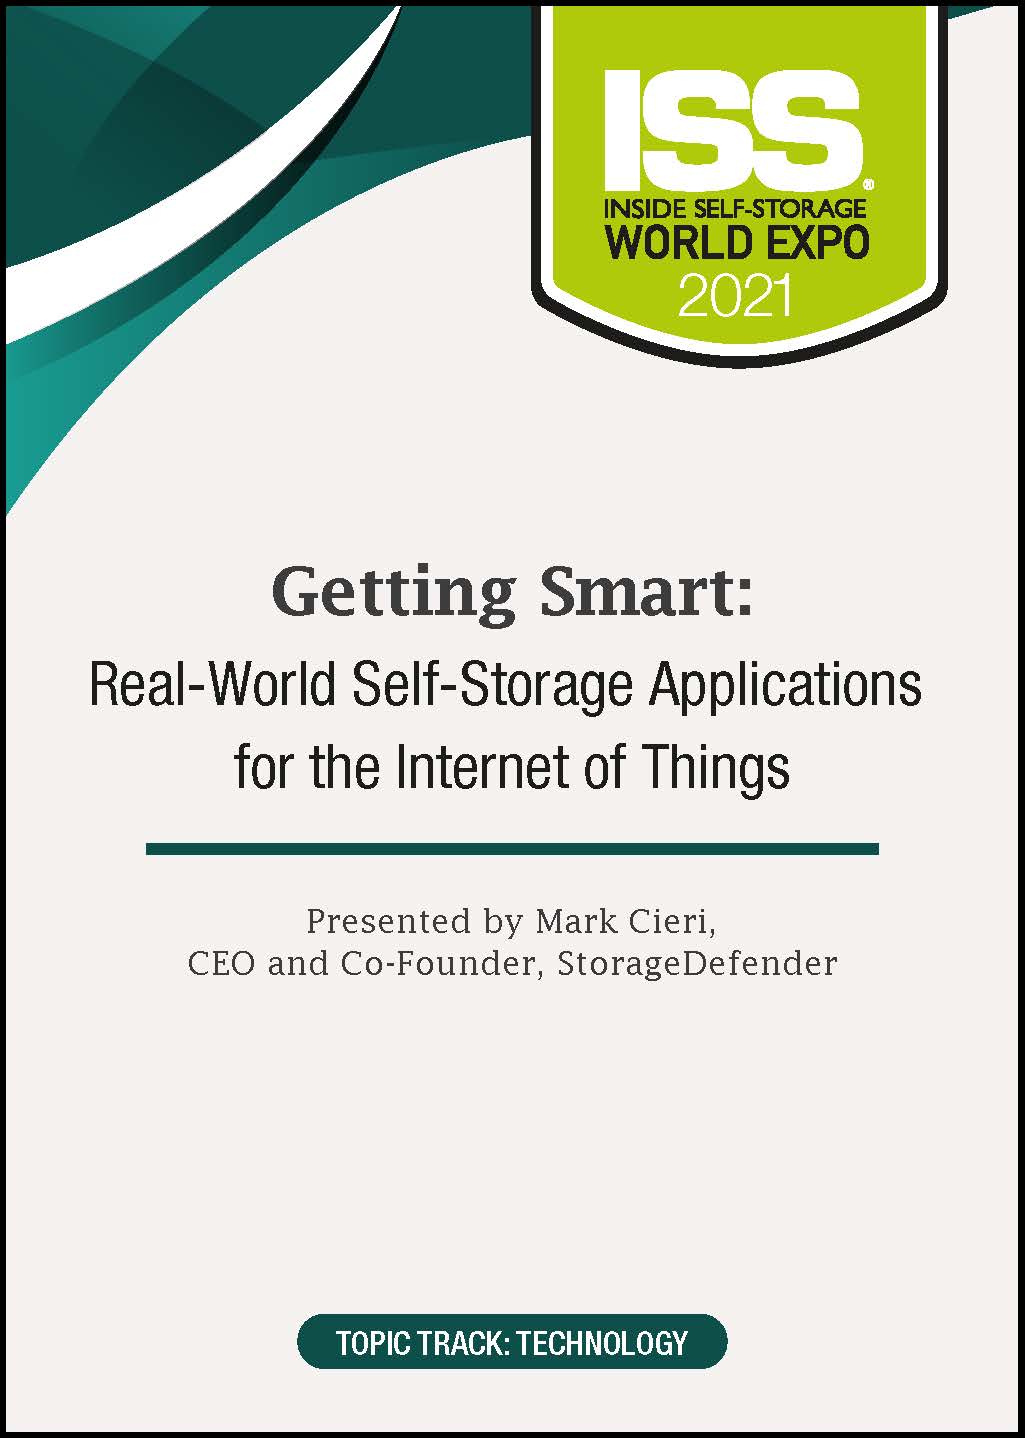 Getting Smart: Real-World Self-Storage Applications for the Internet of Things